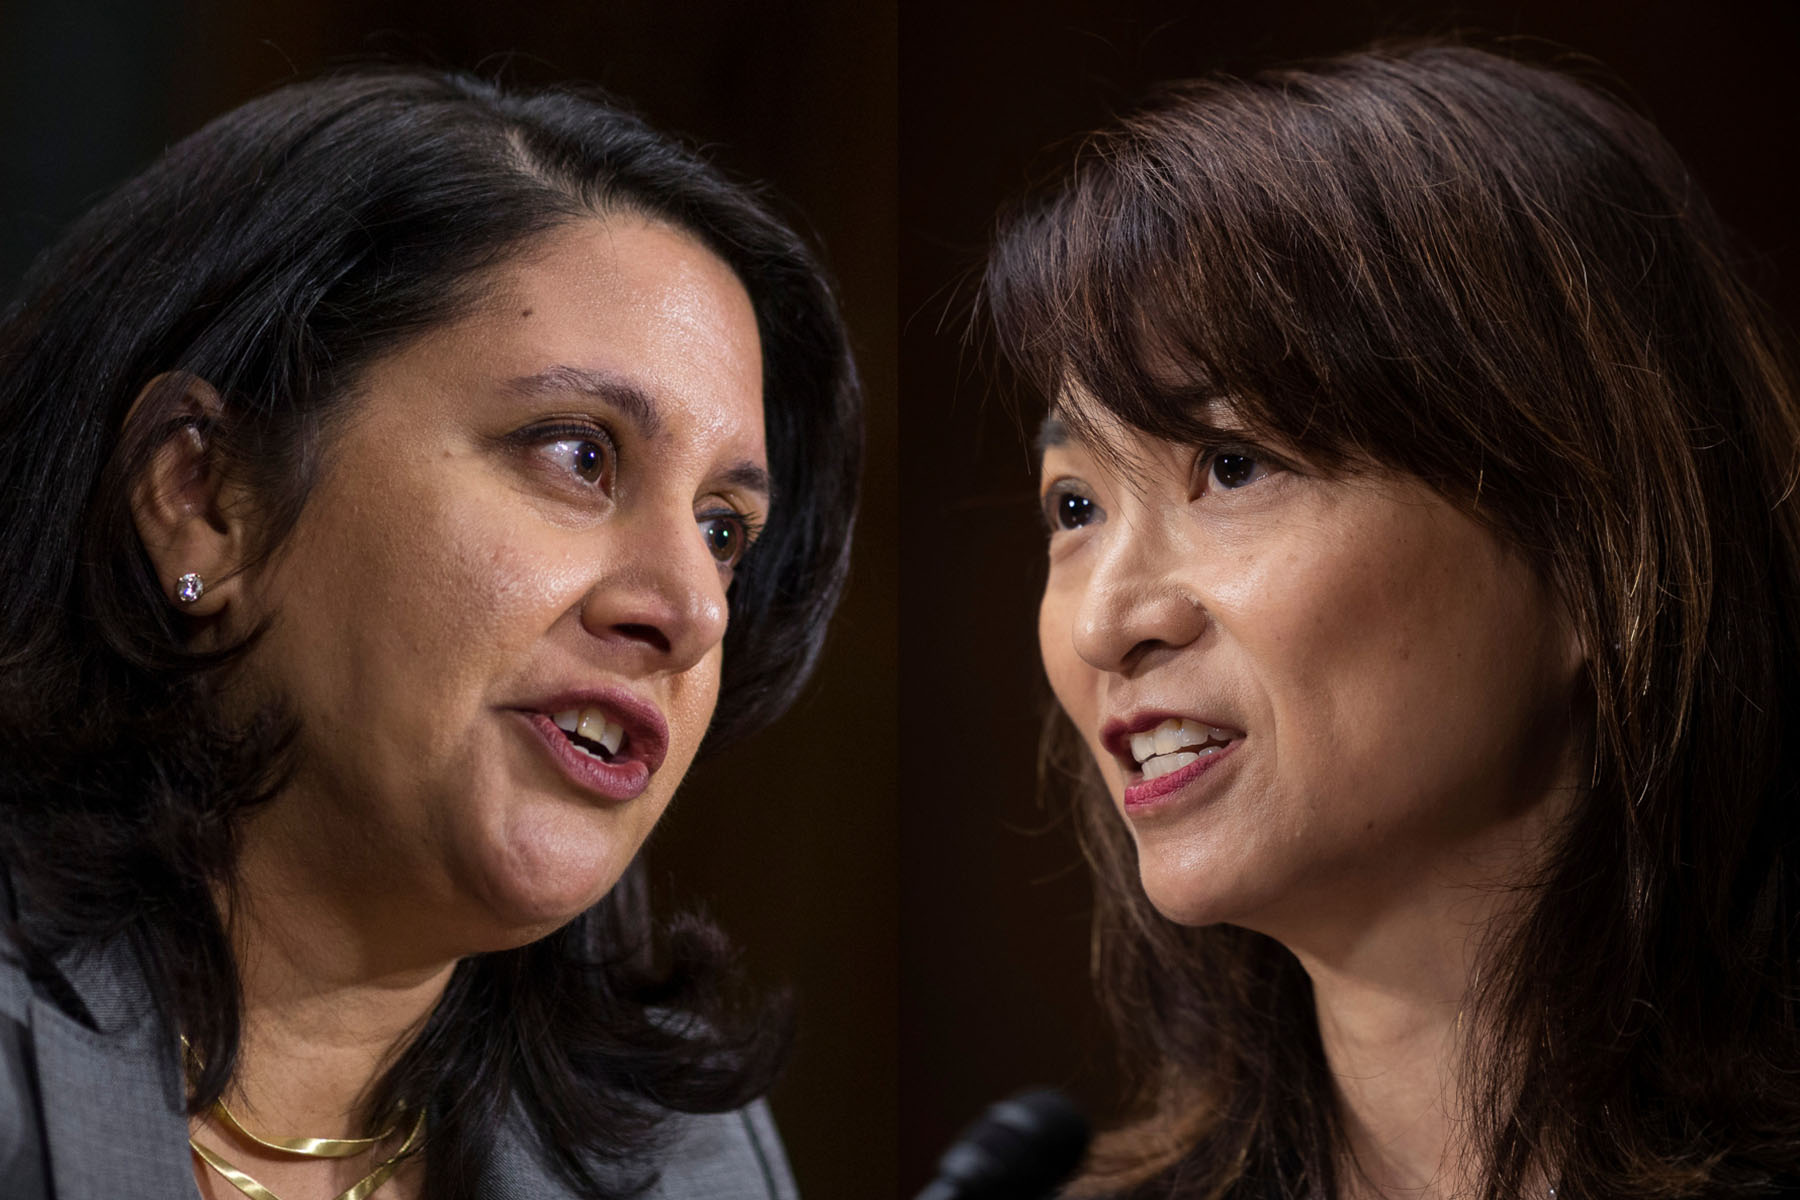 More AAPI women are becoming federal judges, but barriers remain picture